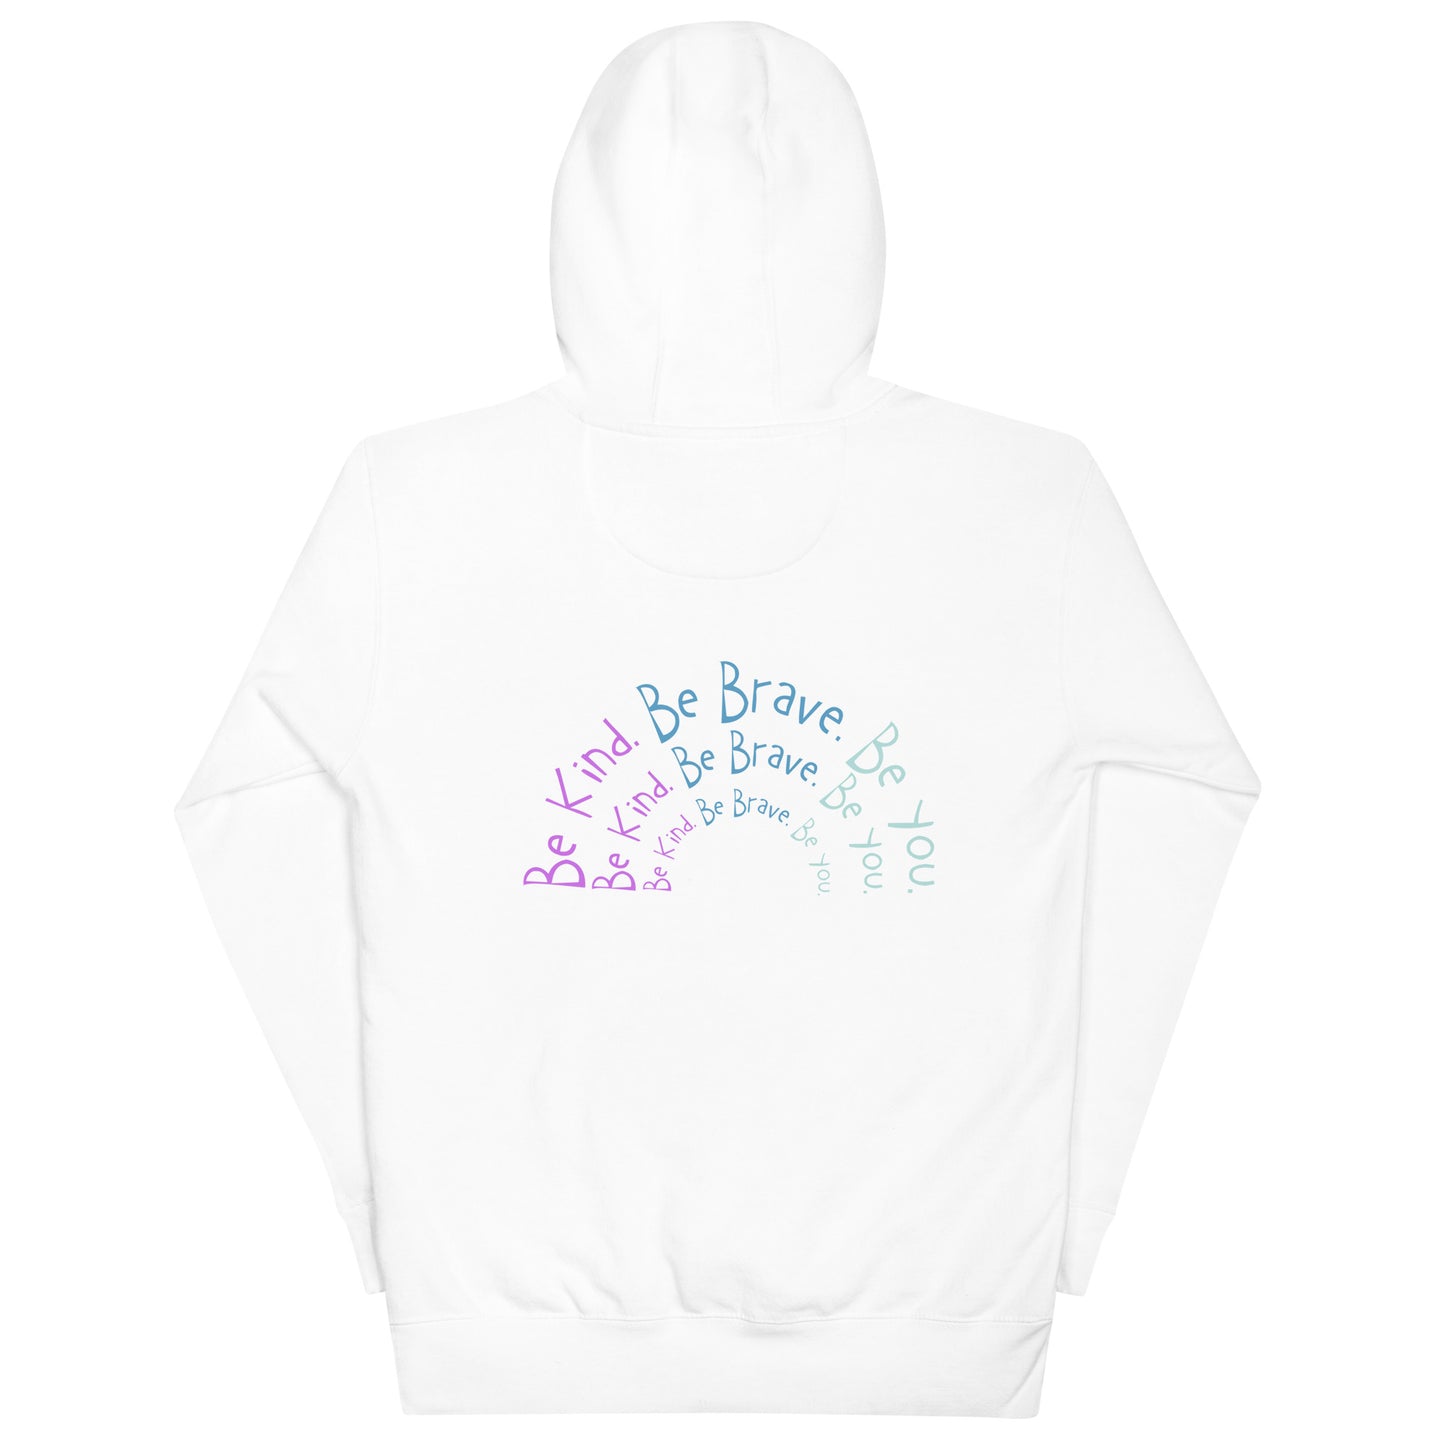 Unisex Hoodie - be kind. be brave. be you. (rainbow back and front)